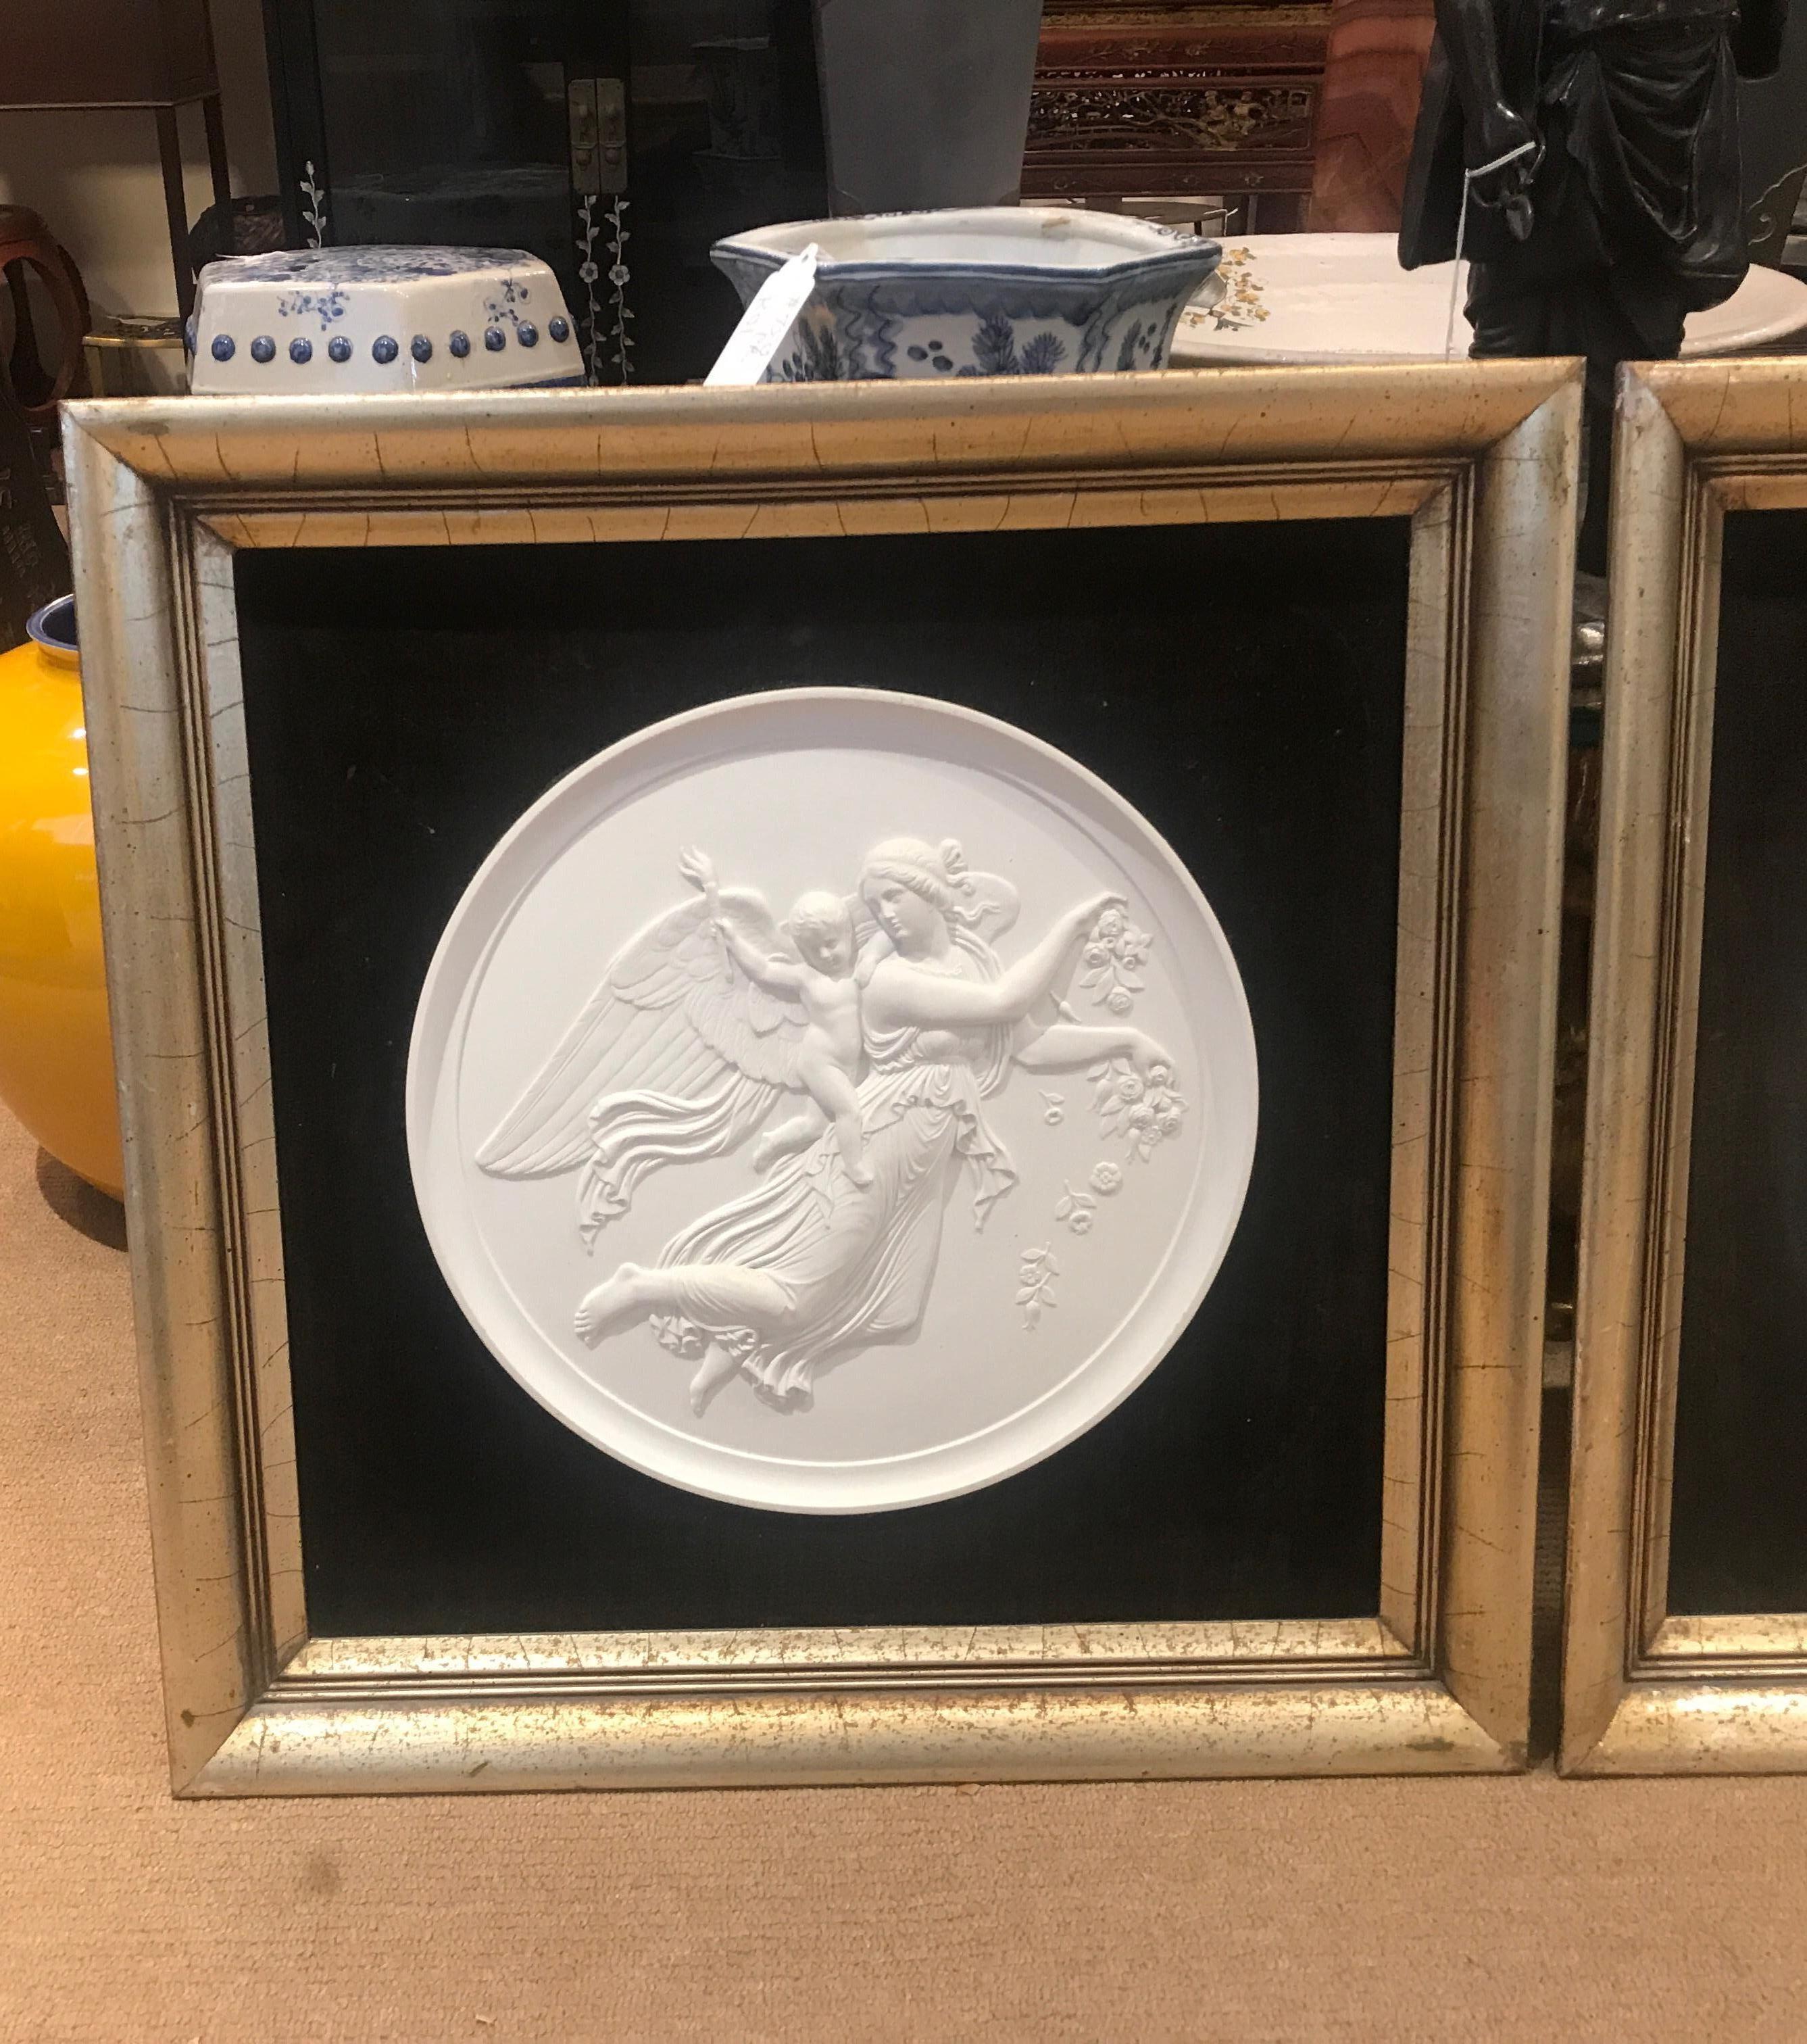 A large pair of antique Royal Copenhagen porcelain allegorical relief plaques with Smokey grey velvet mats. The frames are a silver and gold tone gilt on wood with a distresses finish. They are 19th century plaques framed in the early part of the